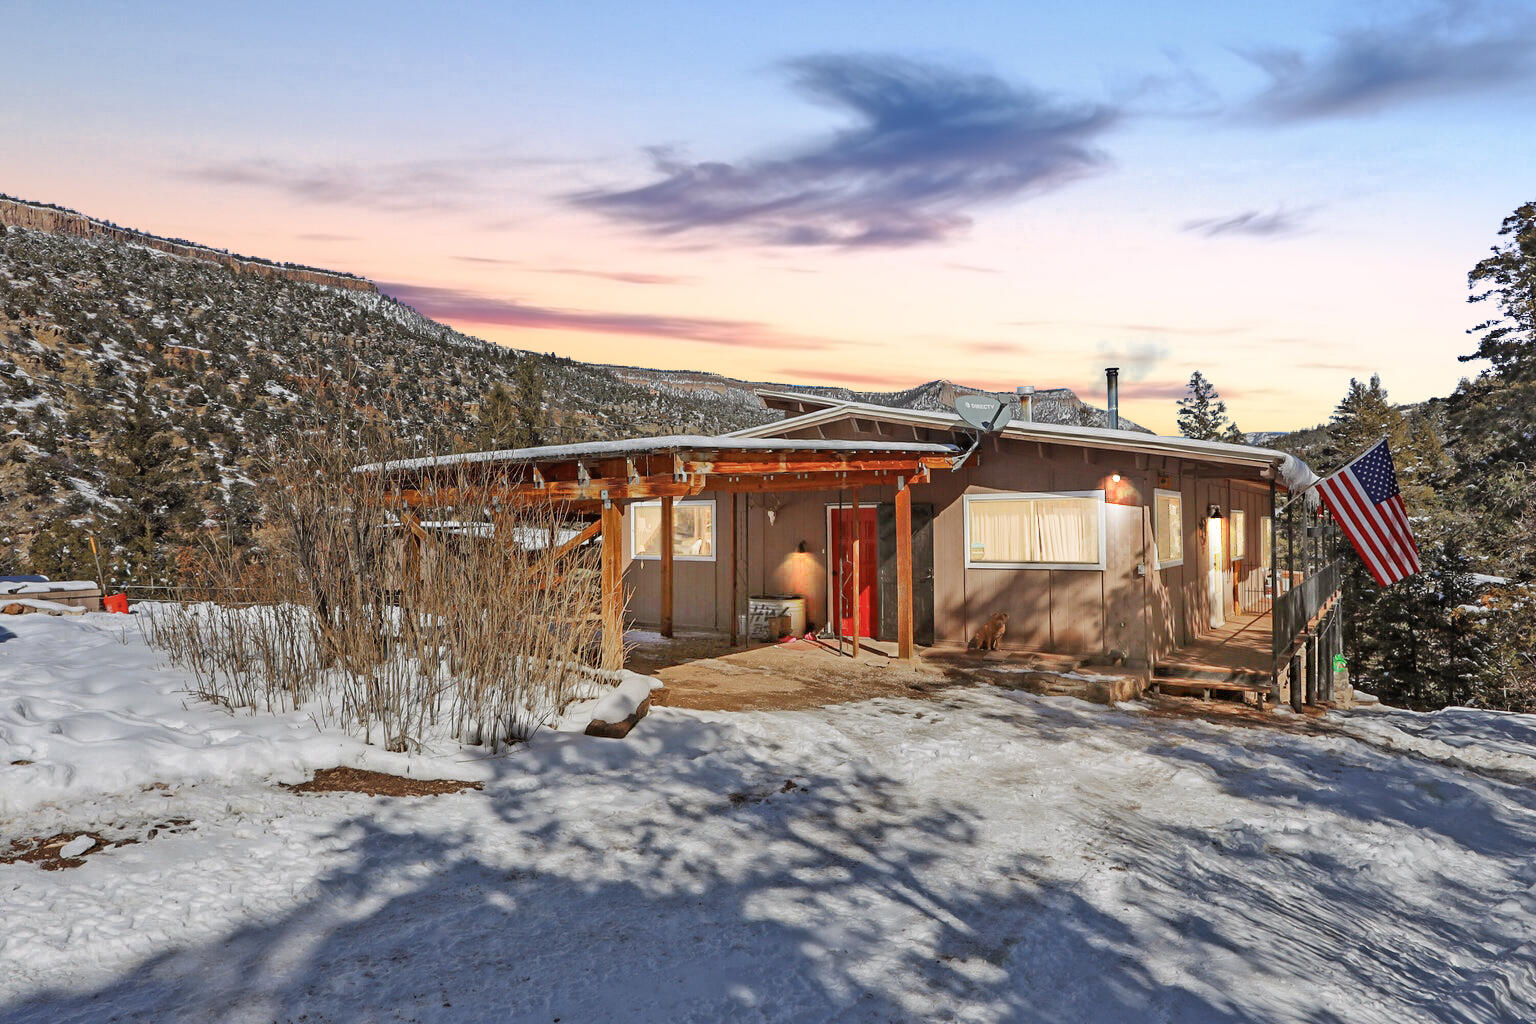 This private mountain getaway, has stunning views of the Jemez Valley that are waiting for you. Just imagine walking around the large deck that partially surrounds the home. This home features 5 bedrooms, 2 baths, a large kitchen, and it has plenty of storage throughout the 2,827 sq ft house. The loft above is an added bonus that could easily be a home office or play area. The home comes with an oversized basement that has an additional bedroom with additional space that can easily house an office, gym or studio. This hidden gem is quiet and peaceful and is loaded with plenty of extras around the property, including a chicken coop, 3 carports and a shed. And did I mention how close to the river it is and the views? This home comes with the adjacent lot 33. This is a must see!